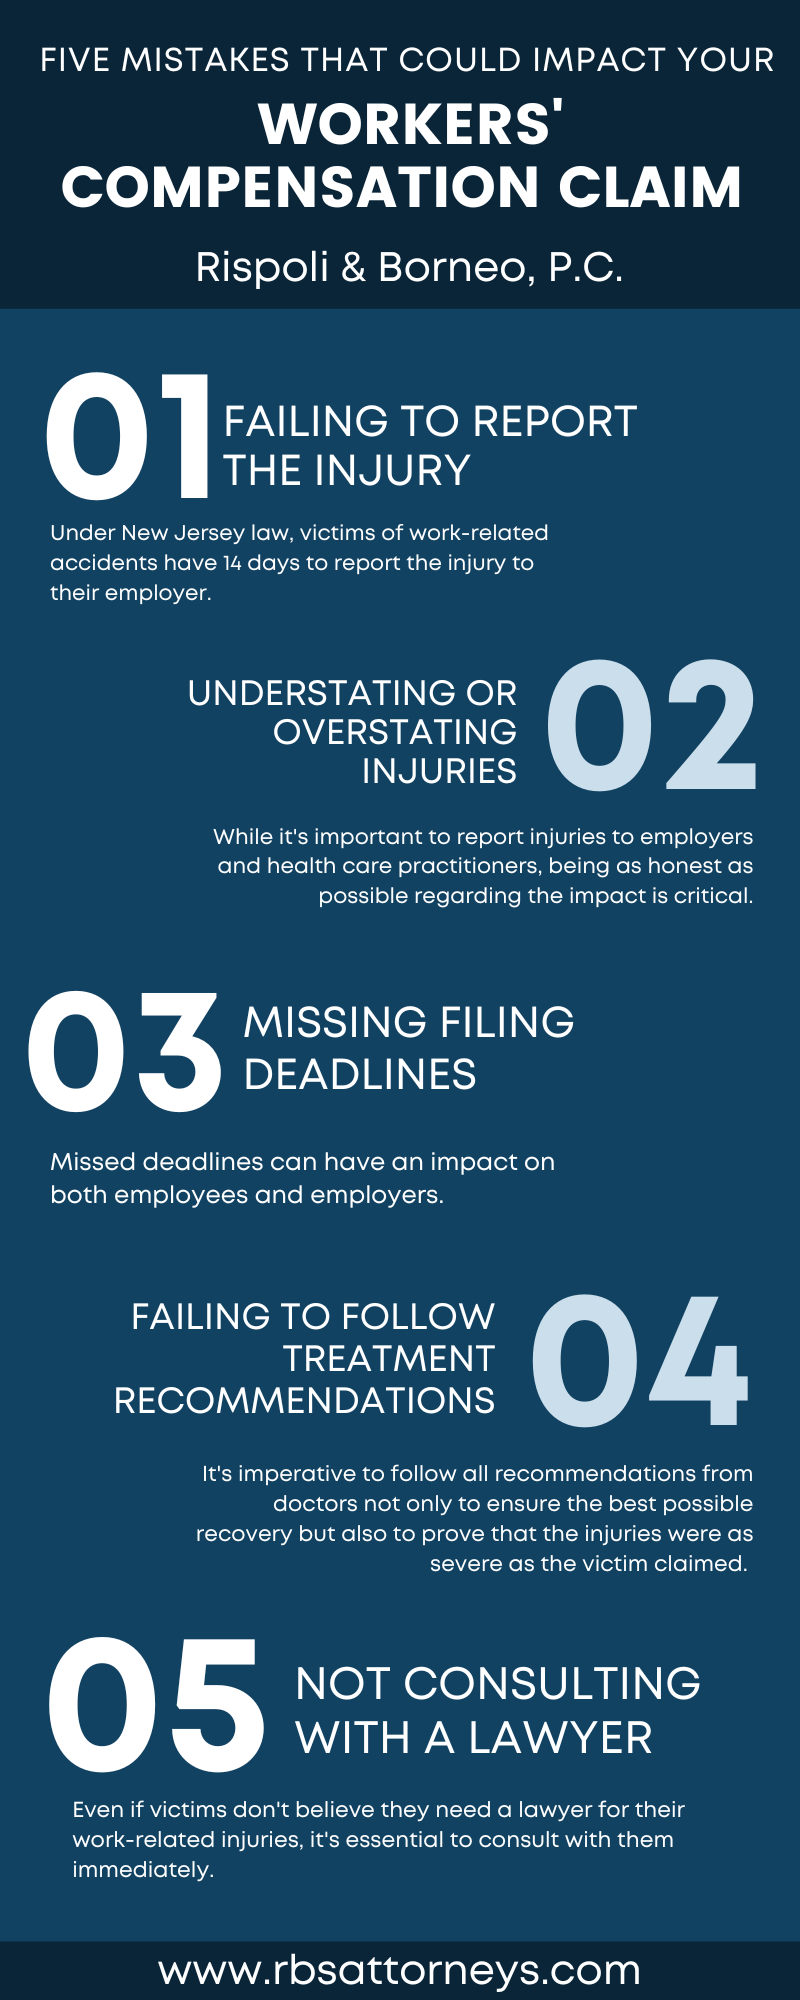 Five Mistakes That Could Impact Your Workers' Compensation Claim Infographic